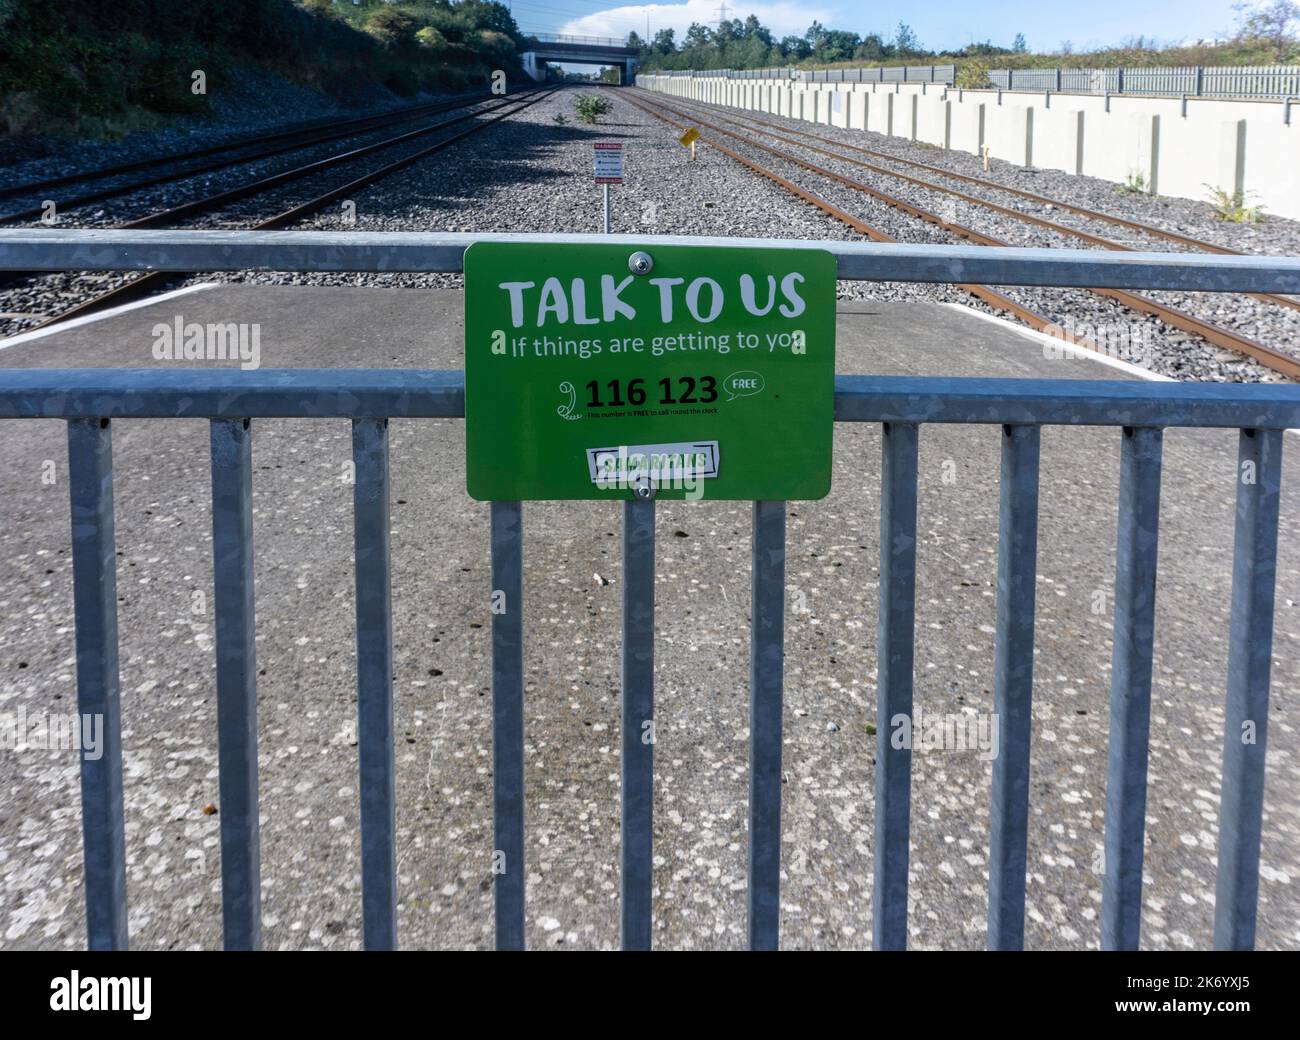 A sign near a railway line in Dublin, Ireland for The Samaritans, advising troubled people to talk to The Samaritans, Stock Photo